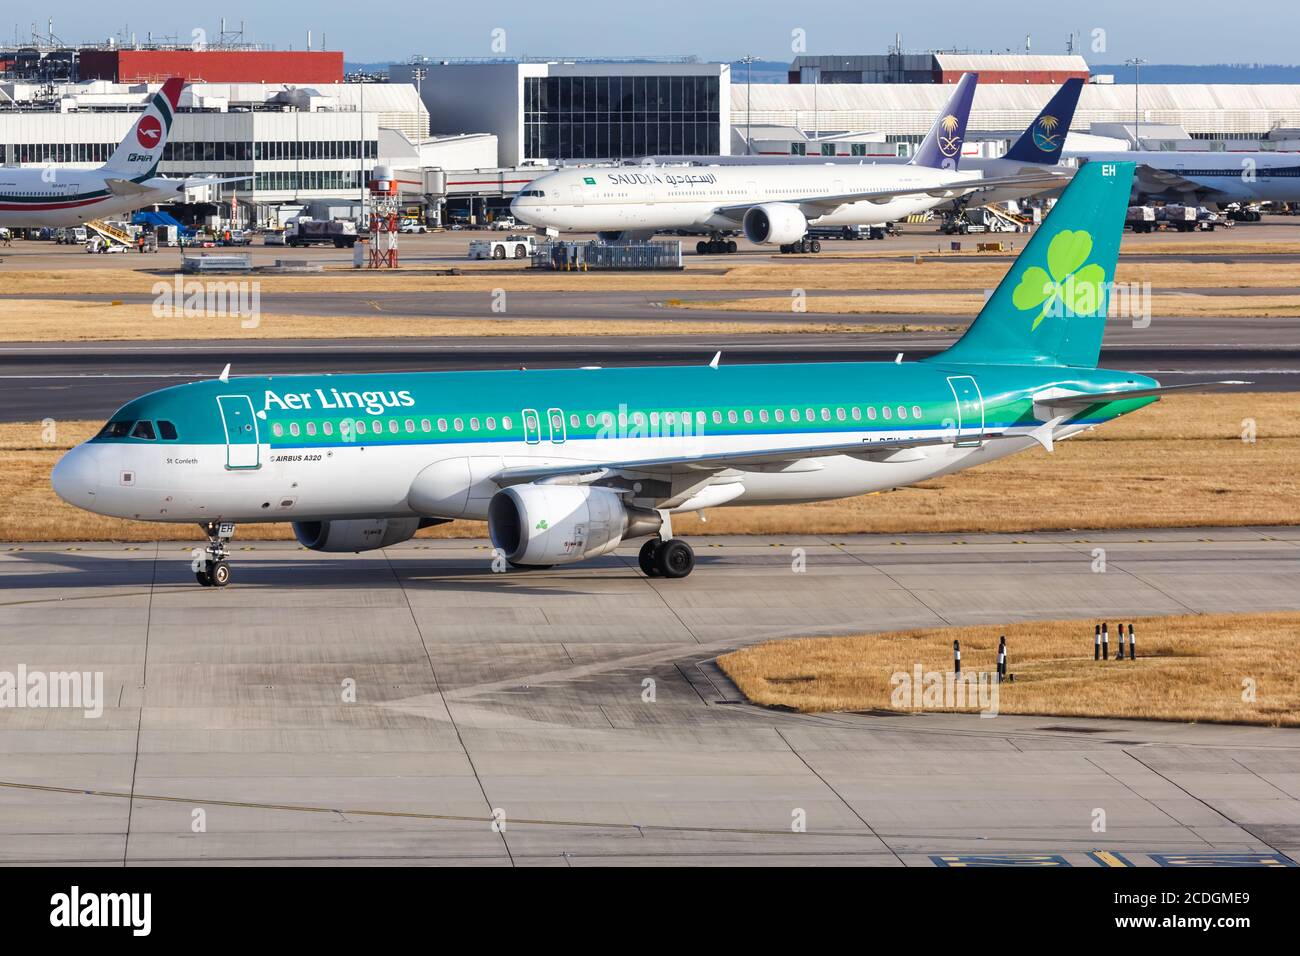 London, United Kingdom - August 1, 2018: Aer Lingus Airbus A320 airplane at London Heathrow Airport (LHR) in the United Kingdom. Stock Photo